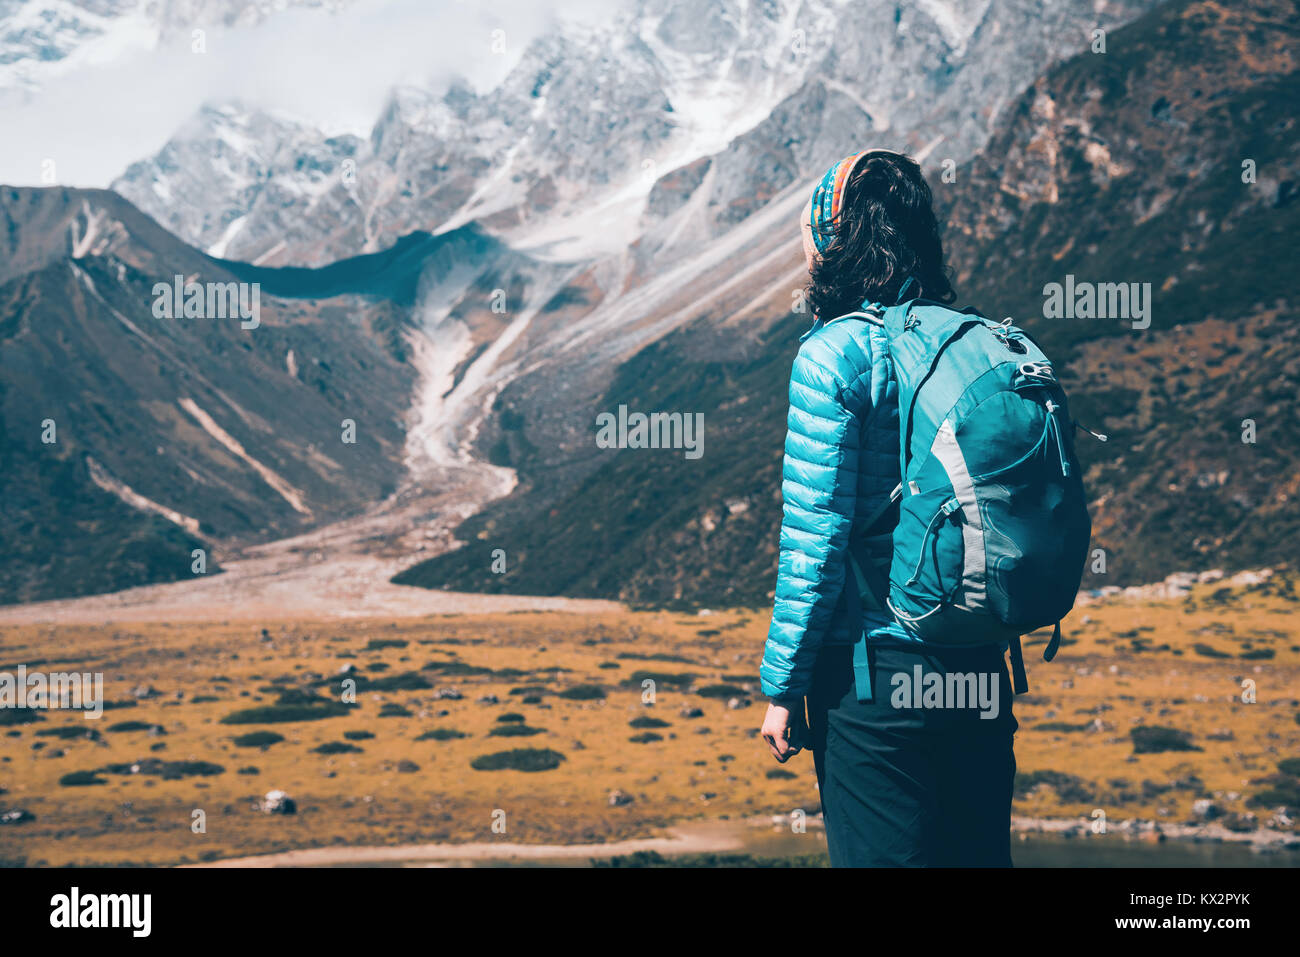 Woman with backpack looking on beautiful mountains in clouds at sunrise. Landscape with girl, high rocks with snowy peaks, blue sky with clouds in Nep Stock Photo